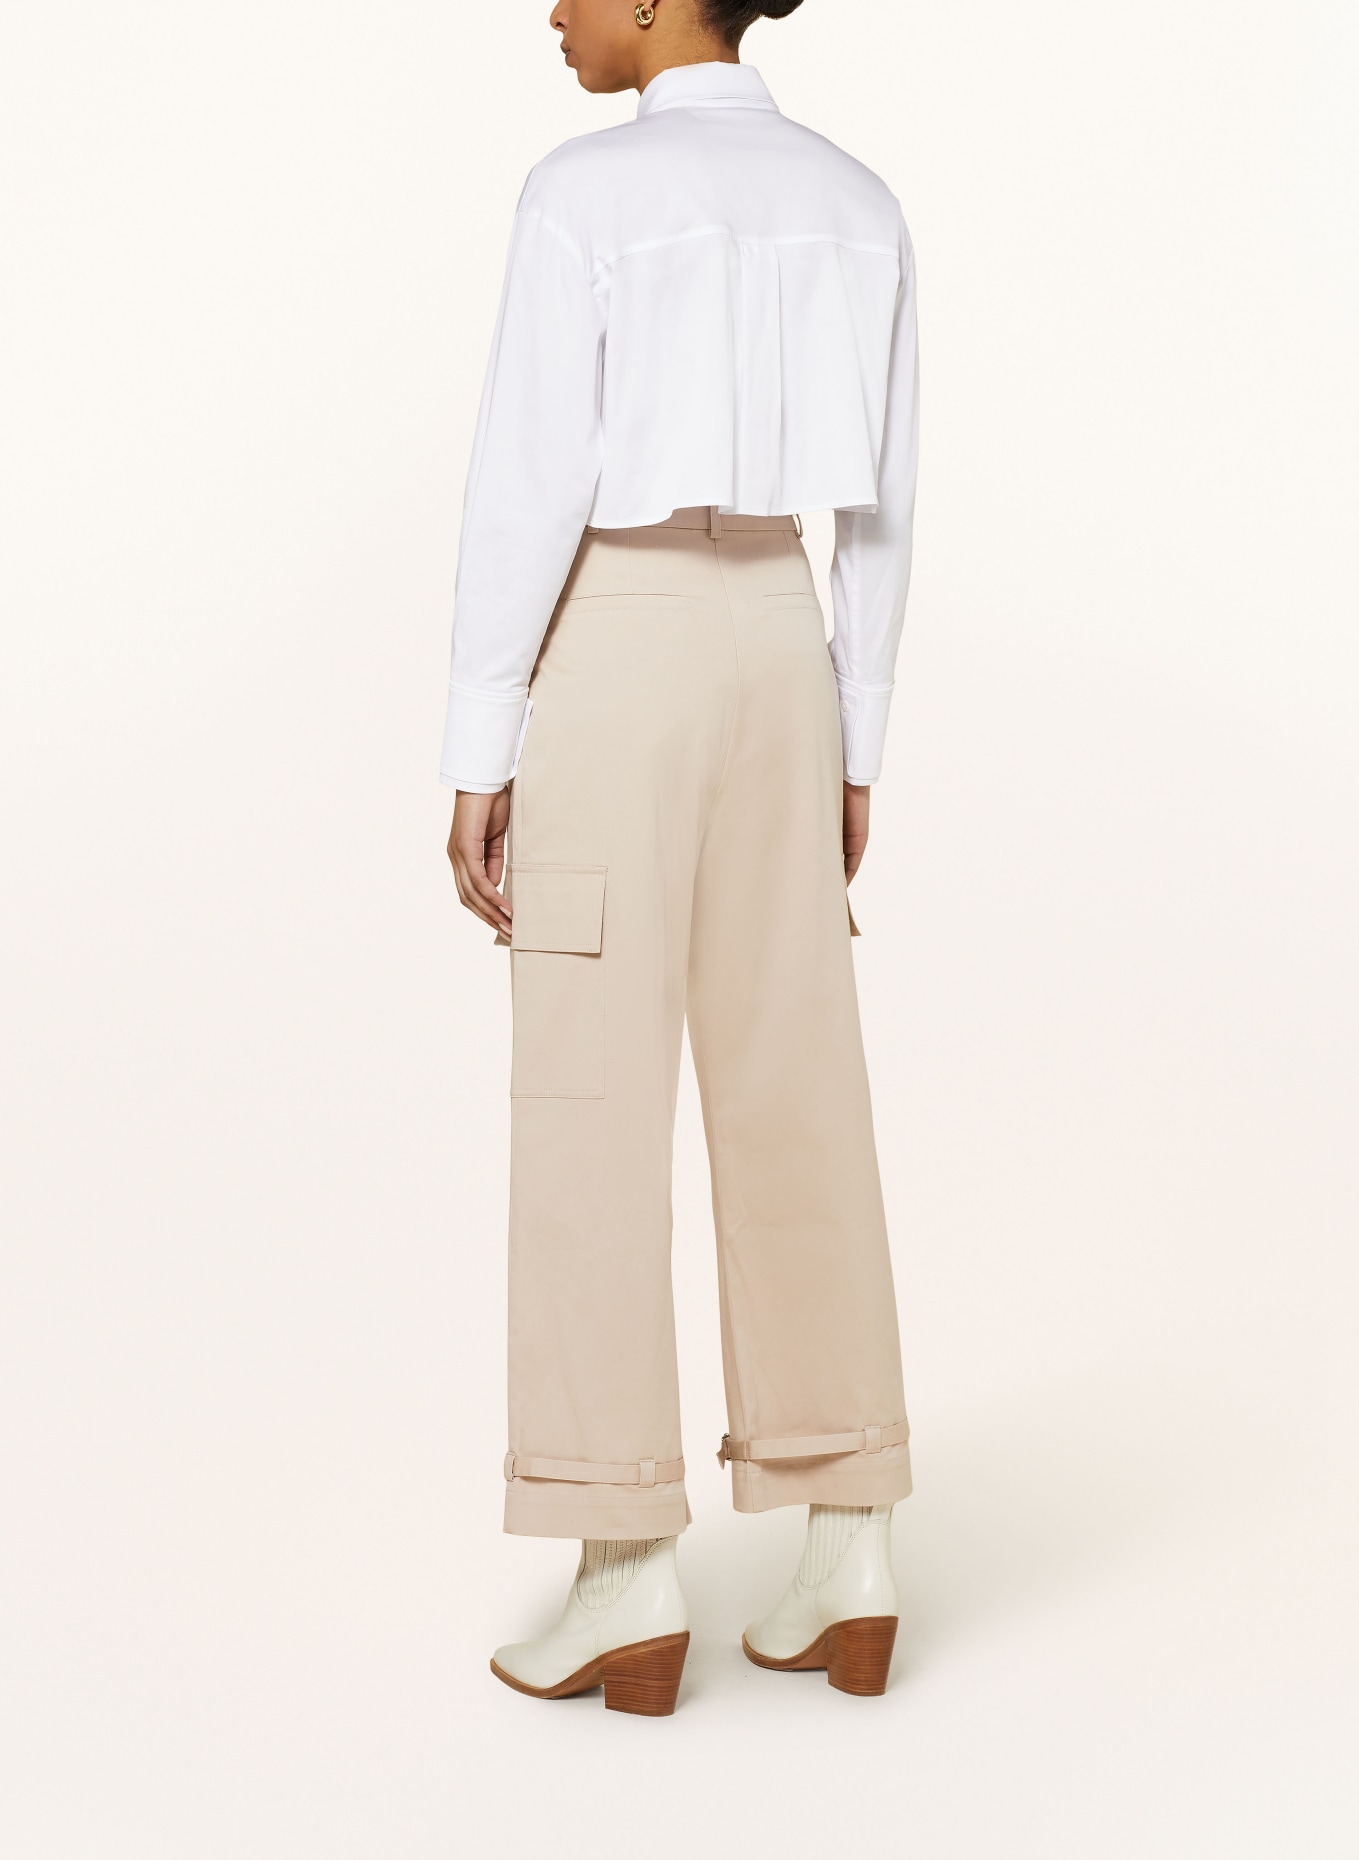 OH APRIL Cropped shirt blouse ARIA, Color: WHITE (Image 3)